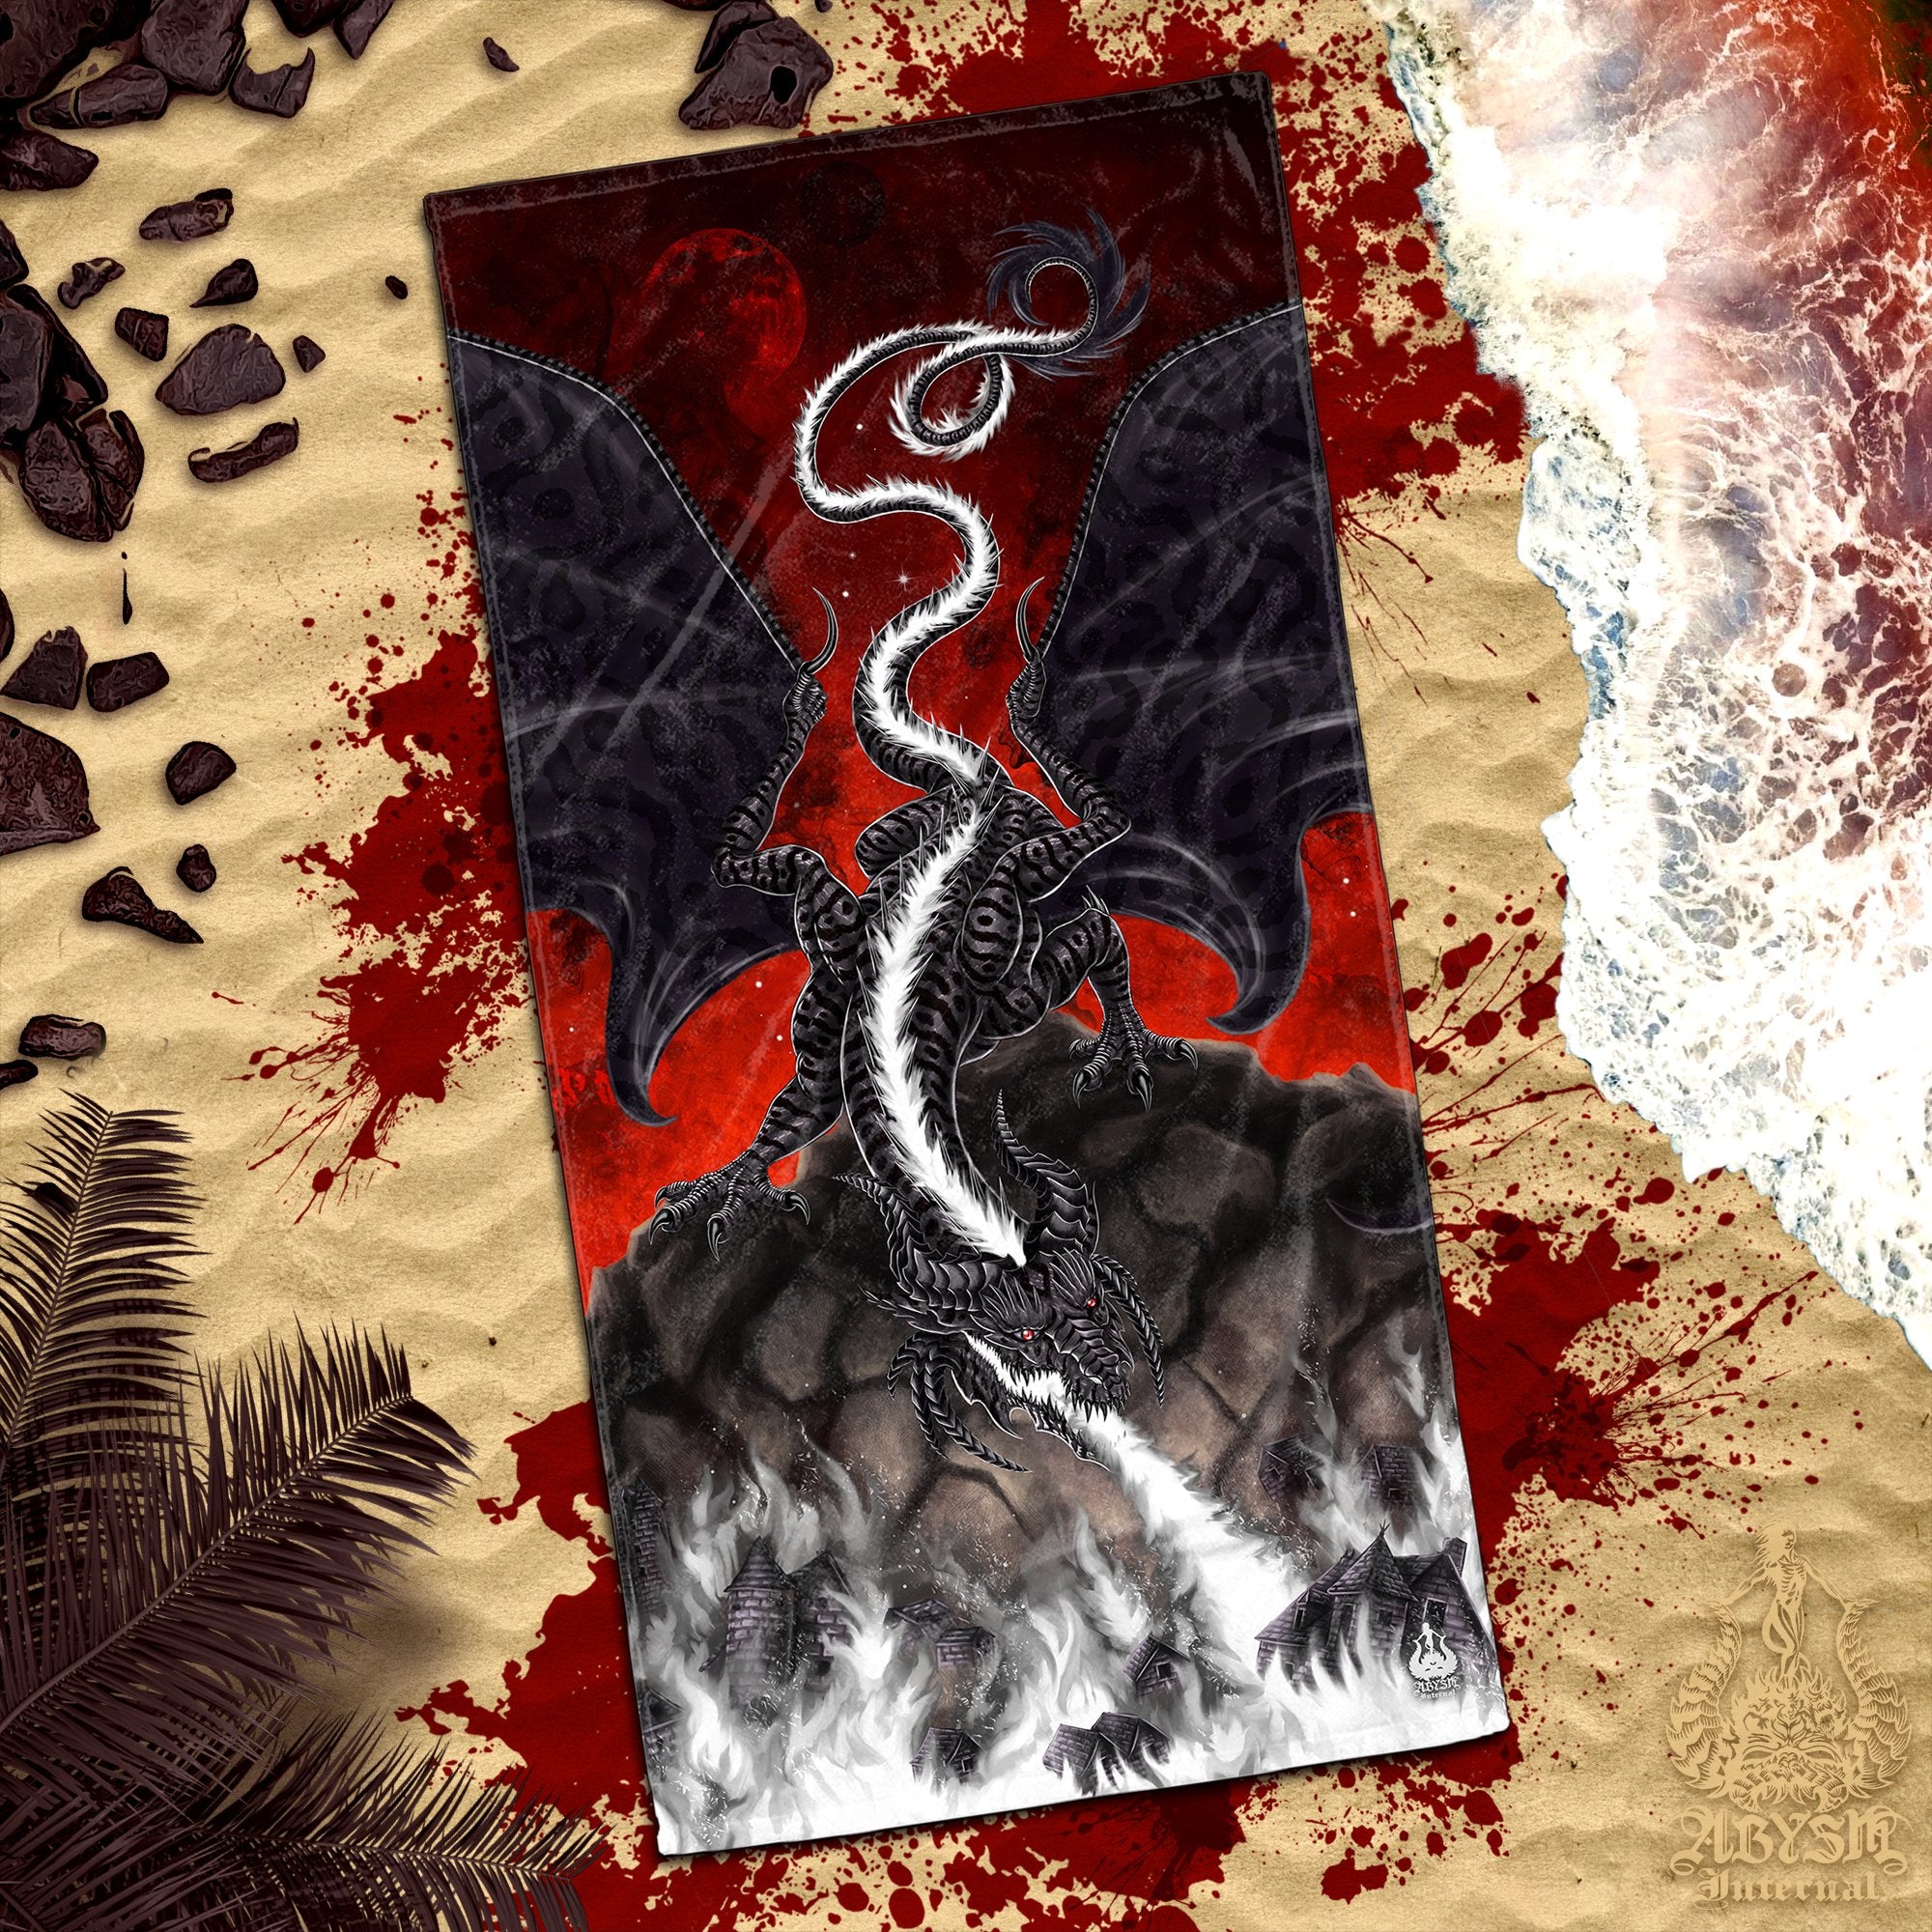 ALL Fire Dragon Beach Towel Designs, Gift Idea for Gamer or DM - 10 Colors - Abysm Internal